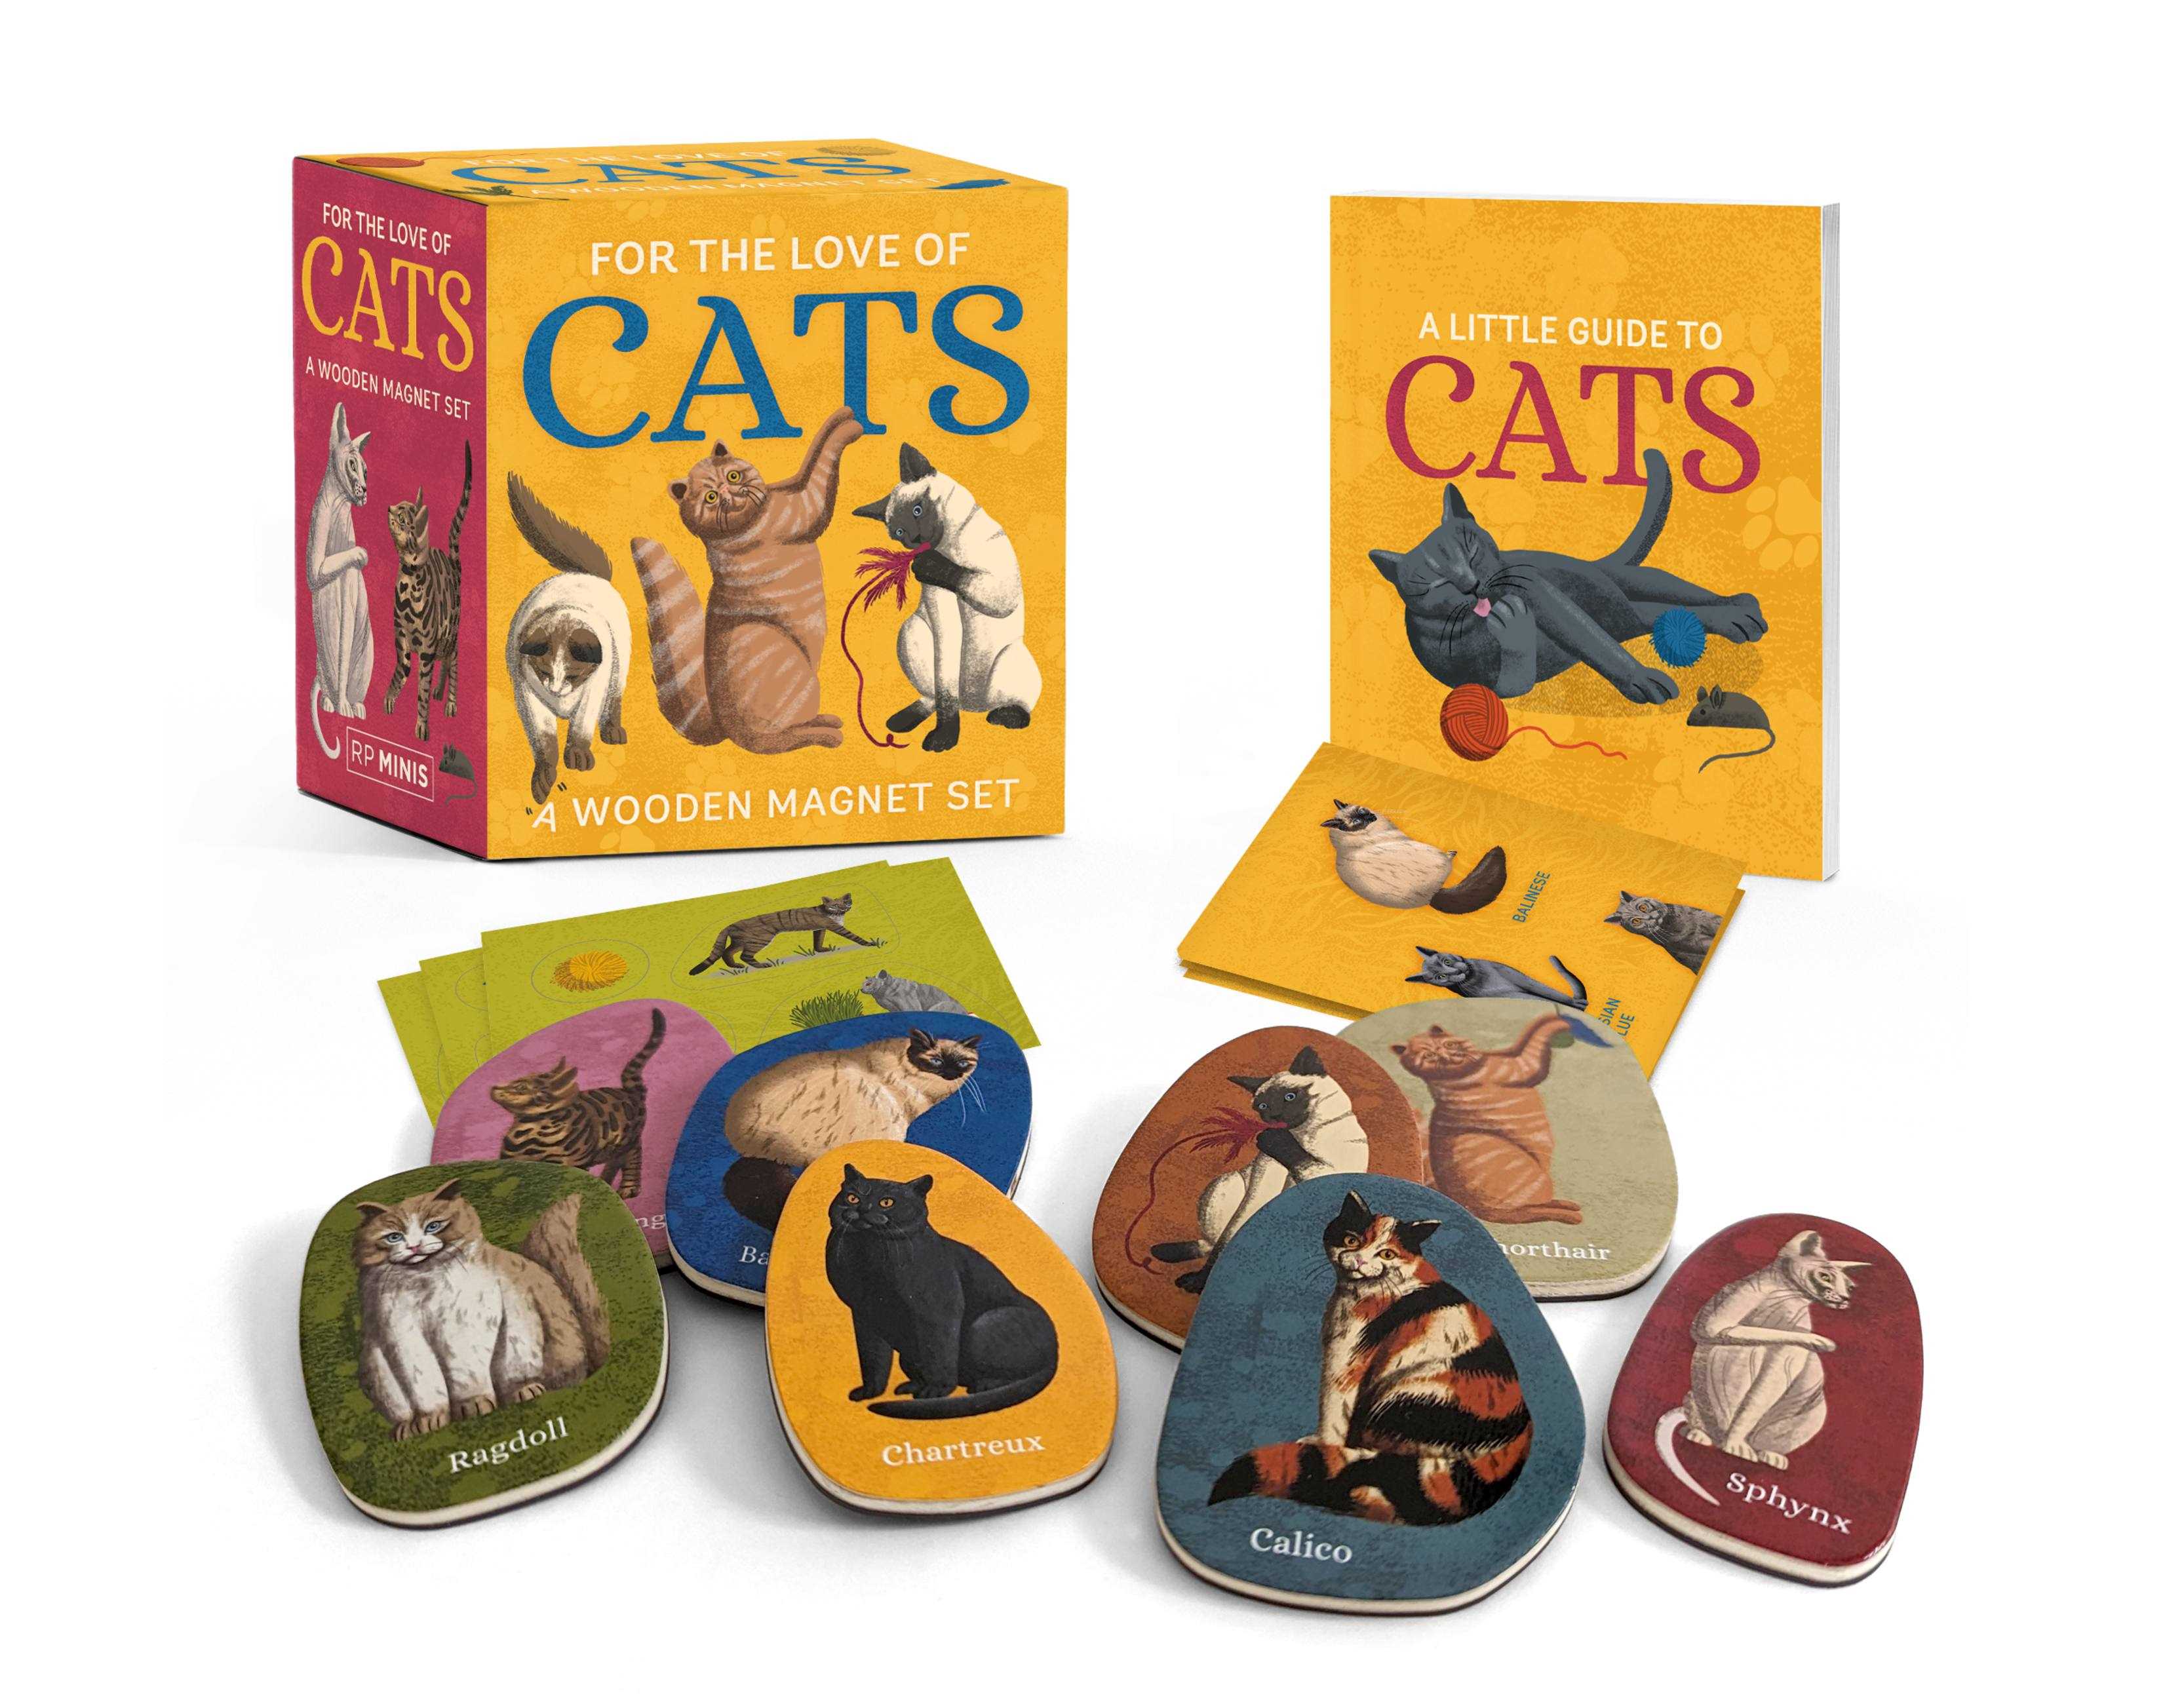 For the Love of Cats (A Wooden Magnet Set)